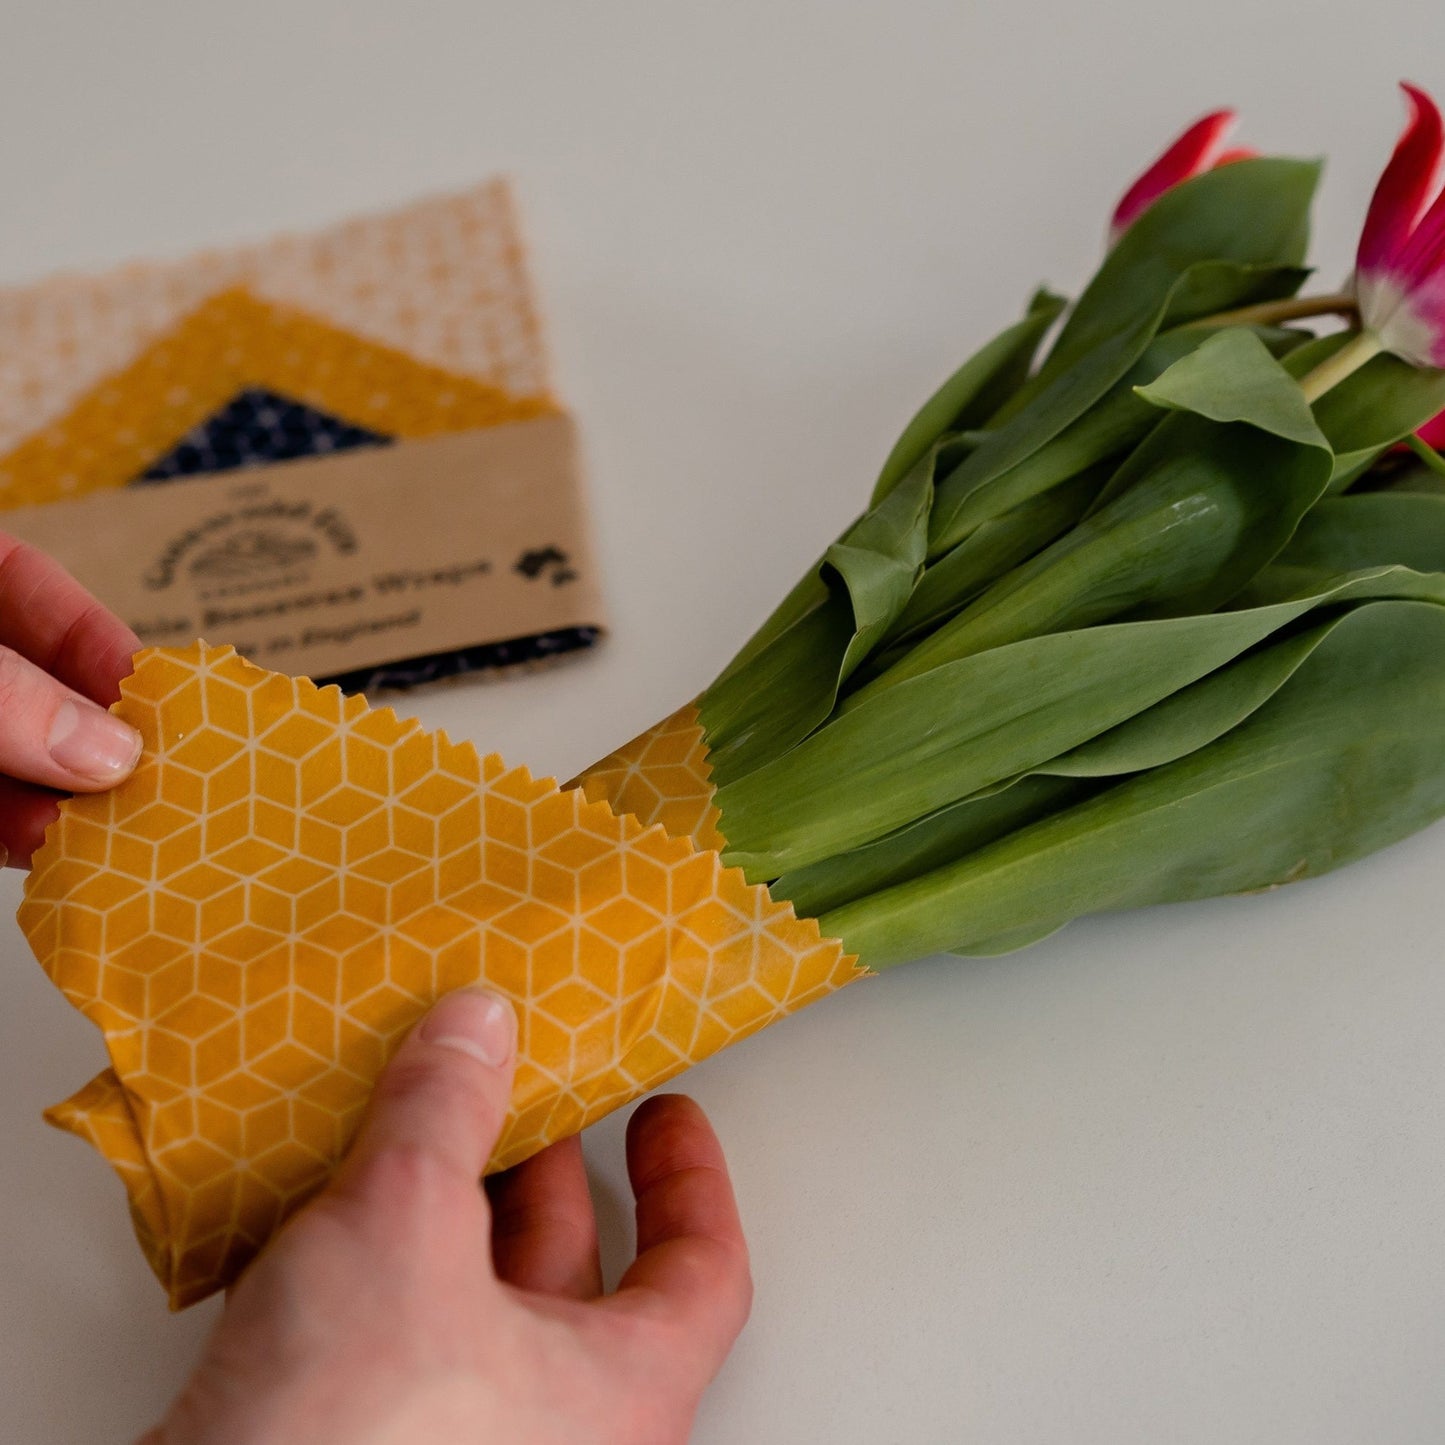 The Cotswold Eco Company Handmade Beeswax Wrap - Wrapping a Bunch of Flowers